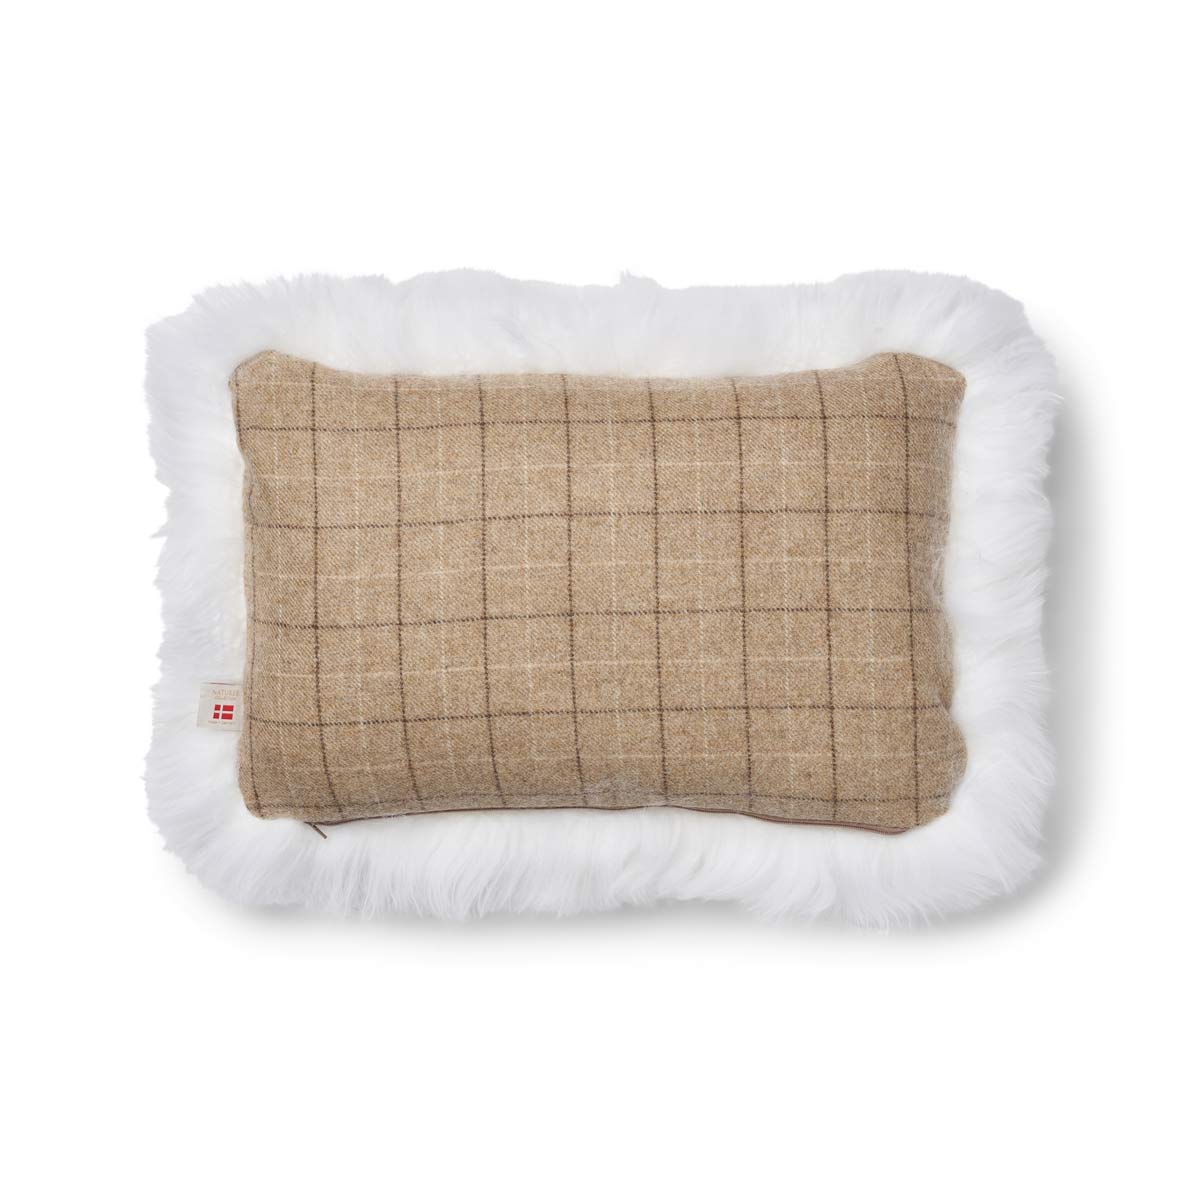 Checked Collection, Cushion One Side 100 % Wool, One Side LW New Zealand Sheepskin. Size: 34x52 cm.